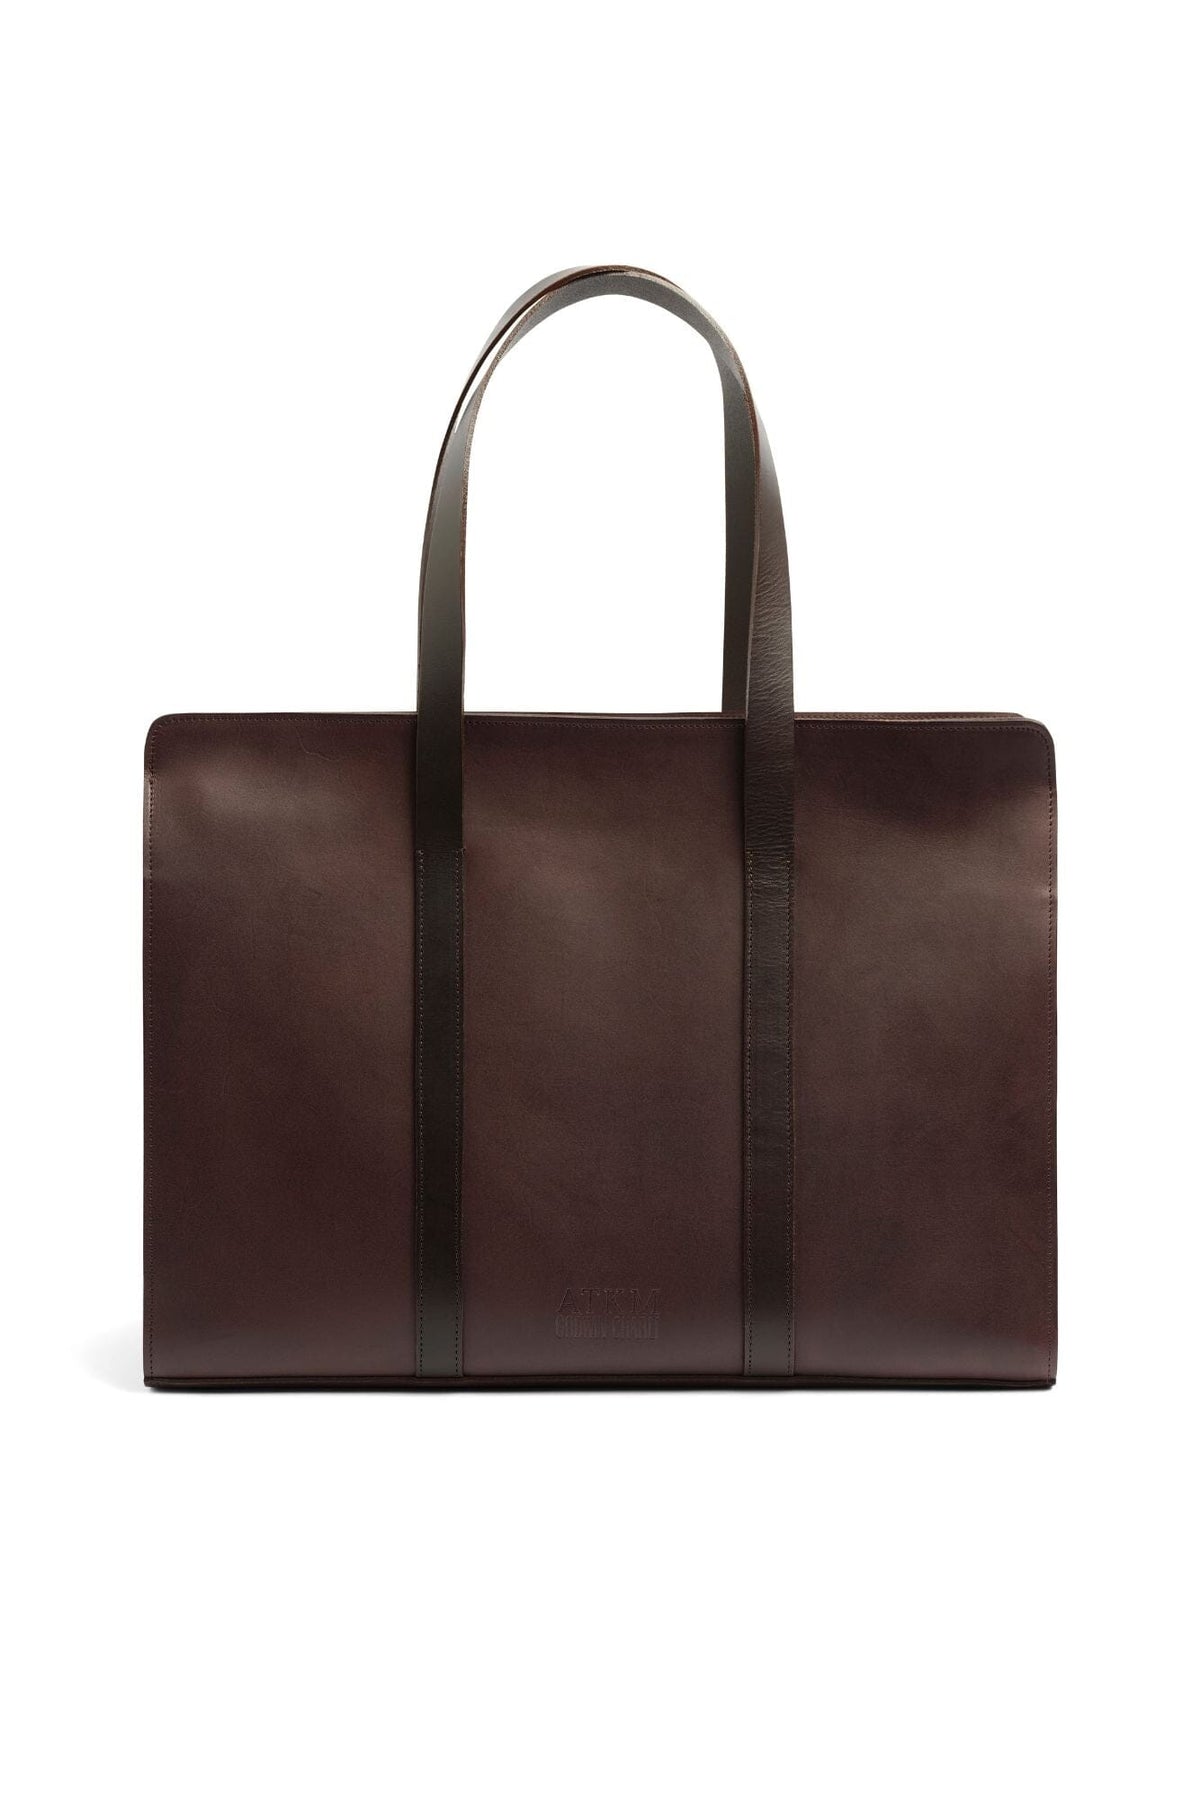 The 'Weekender' - Chestnut Leather